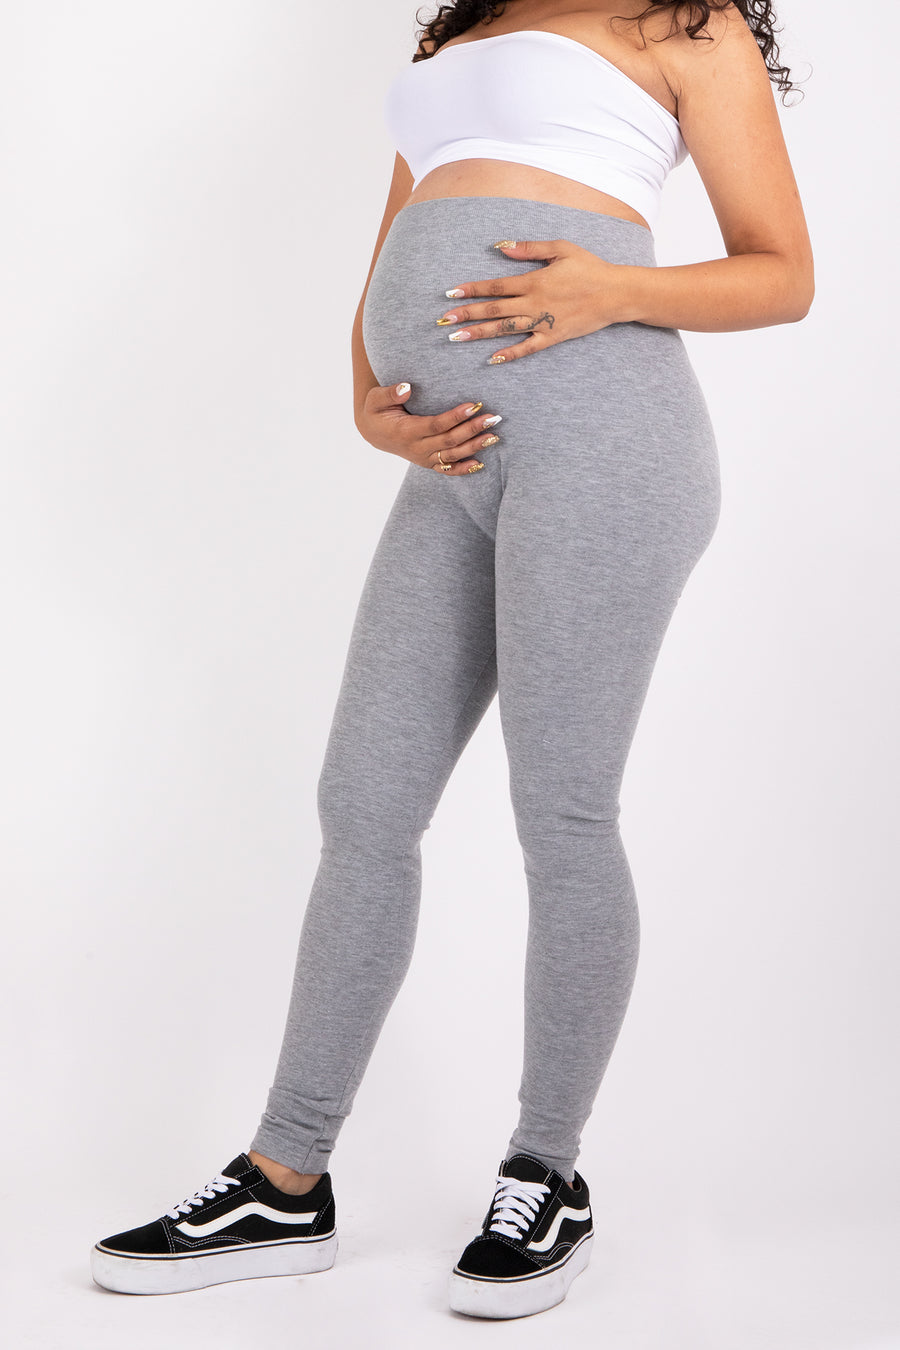 The Maternity Gray Cotton Tummy Control Legging (fits up to Plus)